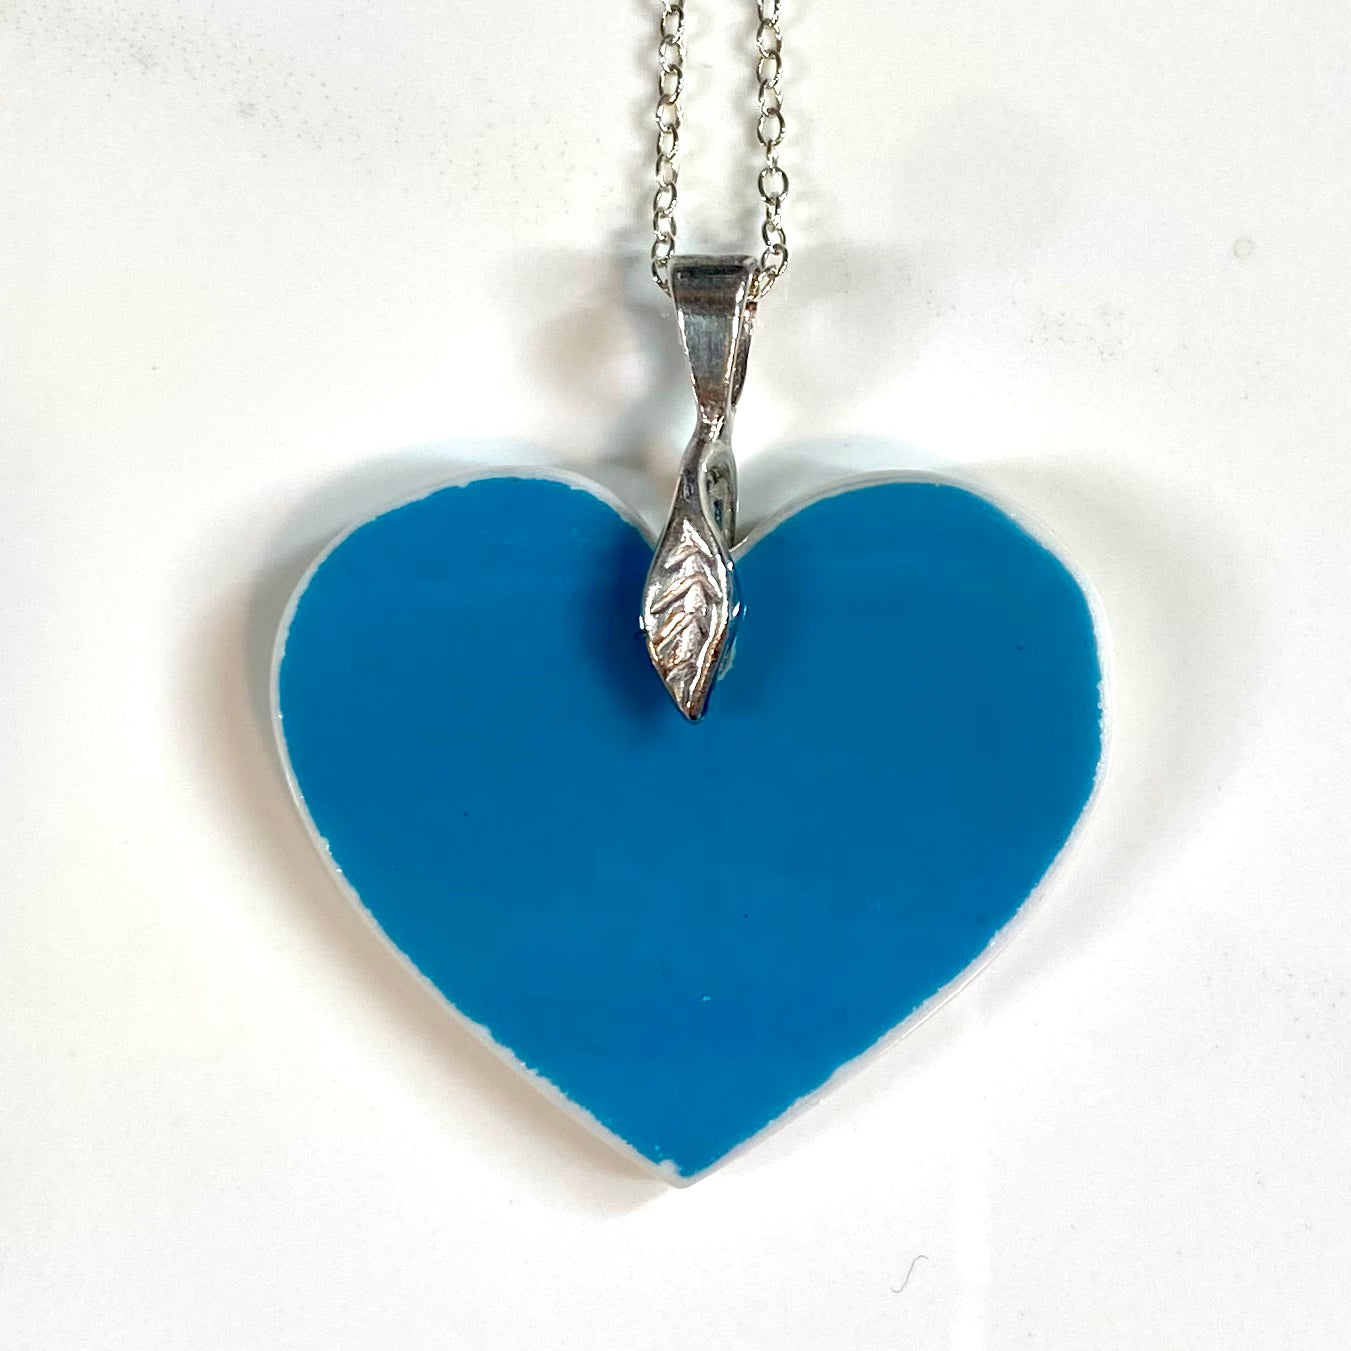 50% off! Sterling Silver Royal Albert Heart Pendant Necklace